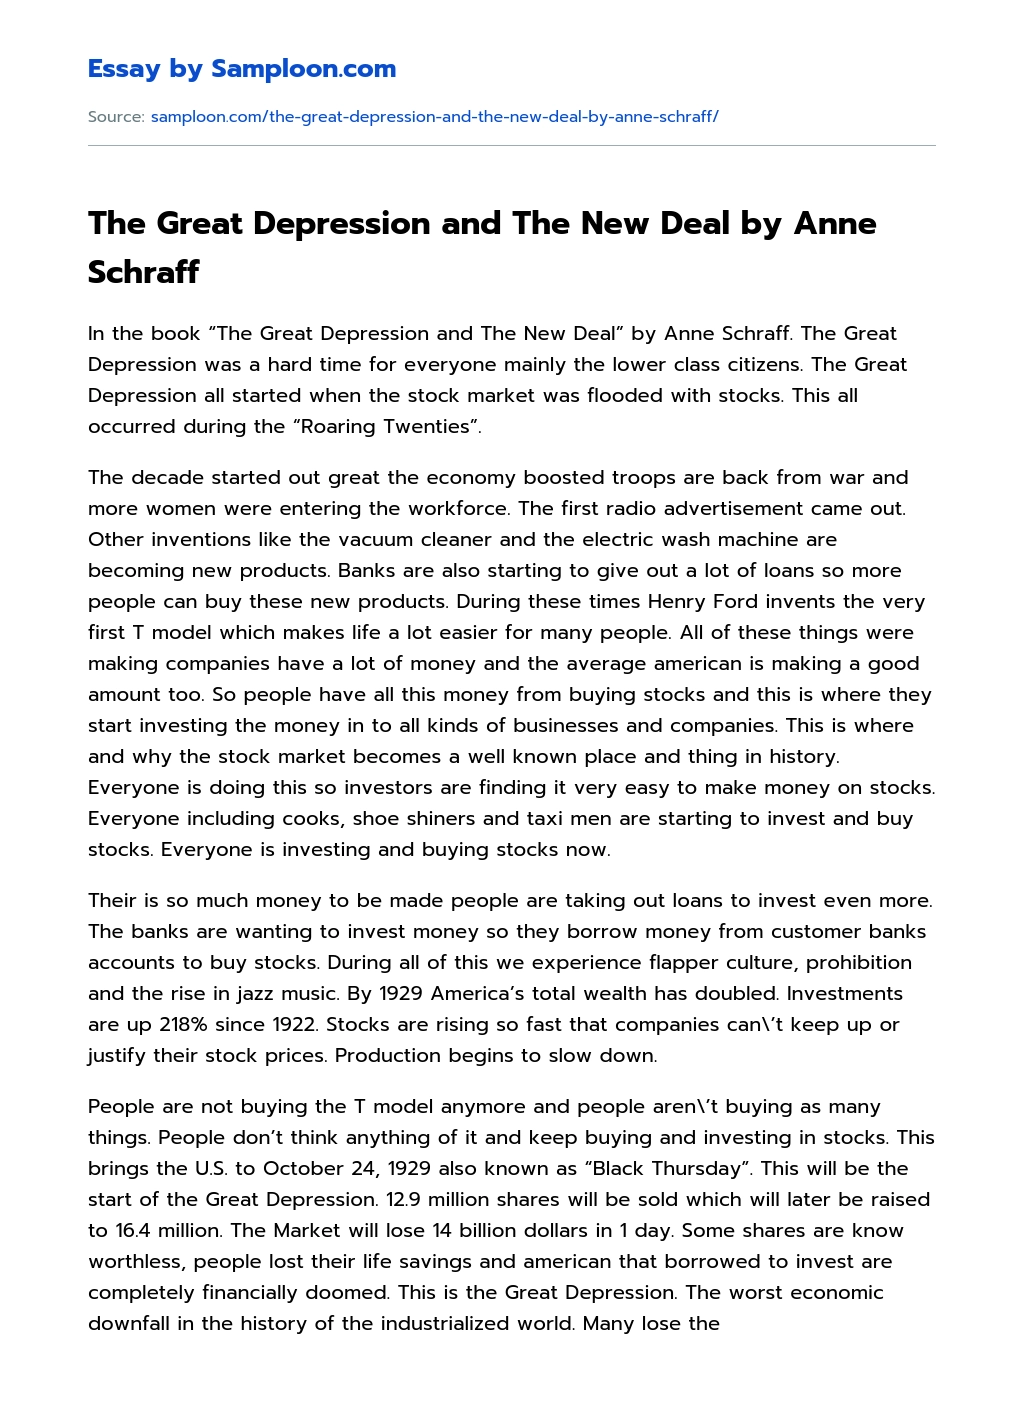 The Great Depression and The New Deal by Anne Schraff essay